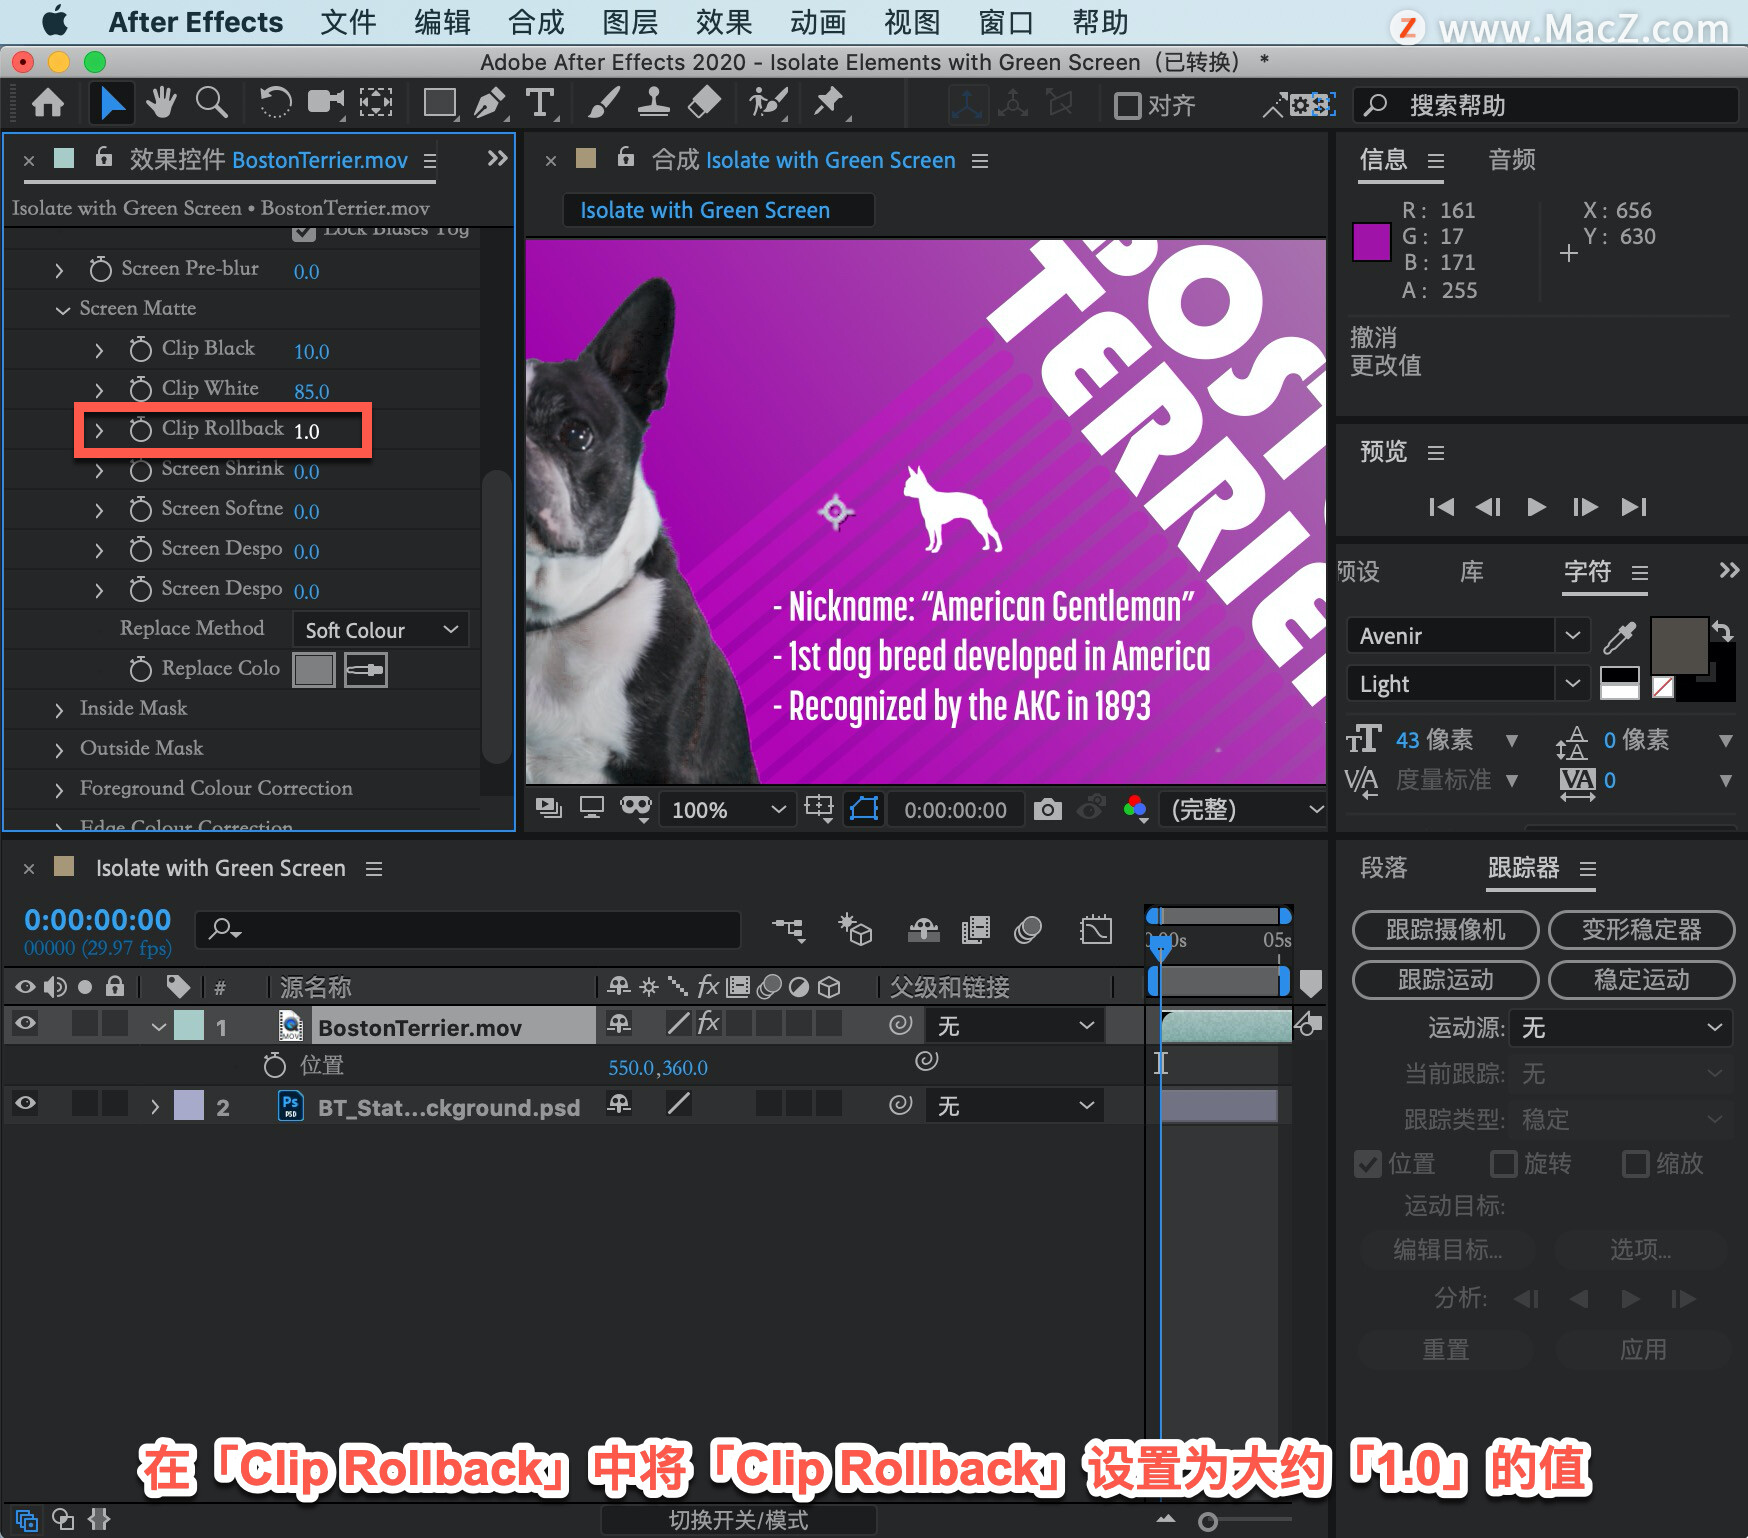 After Effects 教程「36」，如何在 After Effects 中创建透明度？